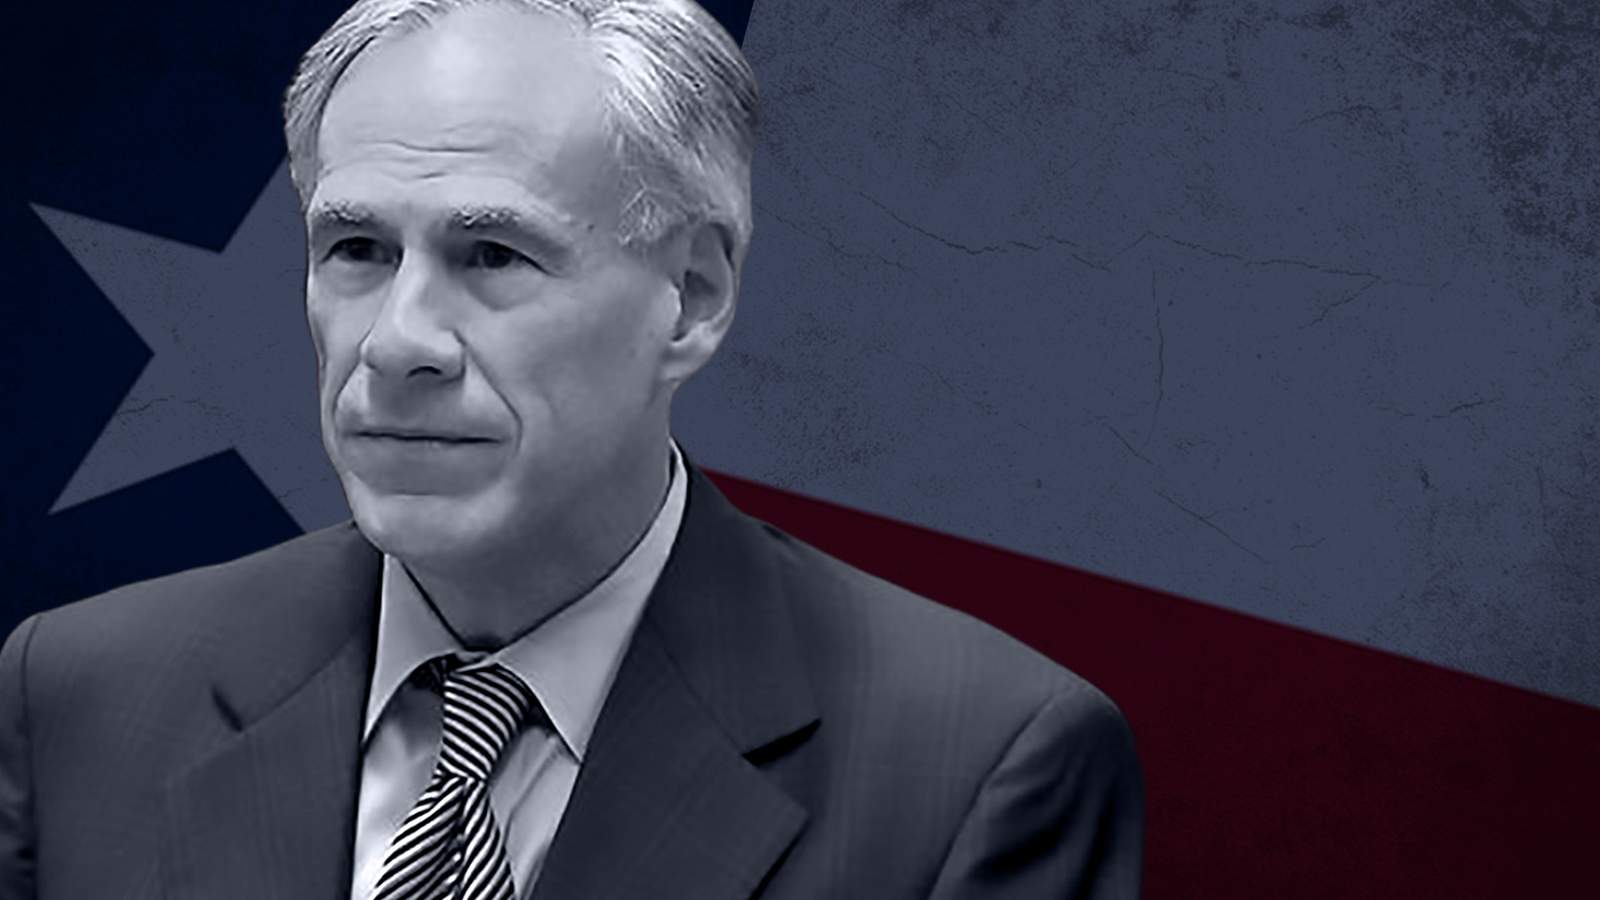 WATCH: Governor Abbott to provide update on states response to COVID-19 at 2 p.m.